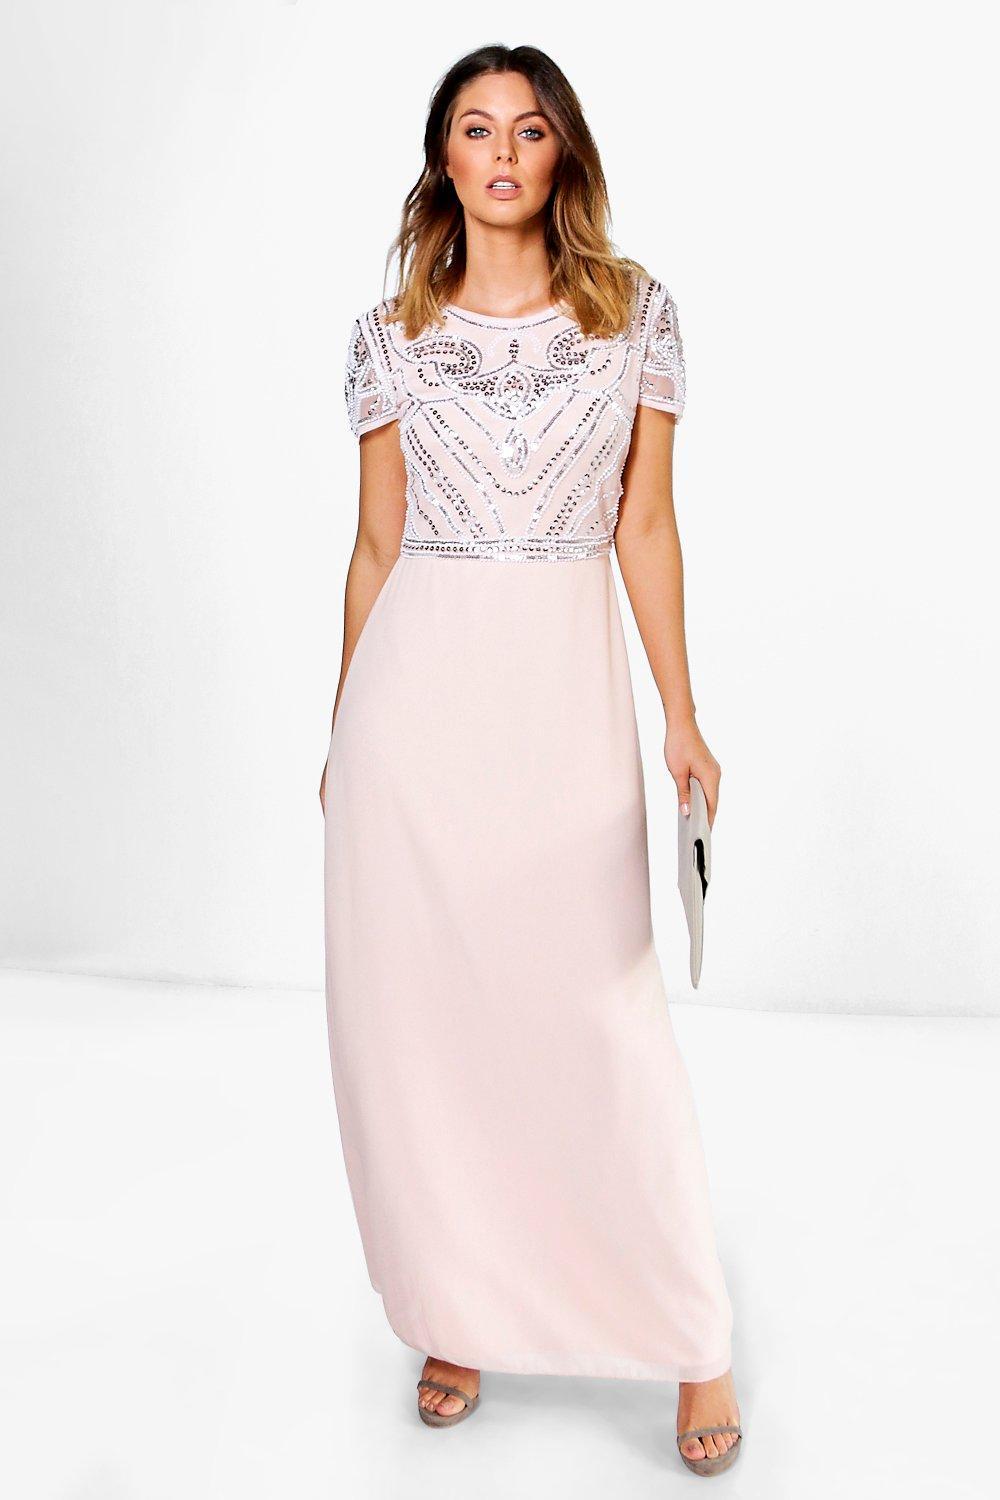 Boohoo Womens Boutique Sequin Embellished Maxi Bridesmaid